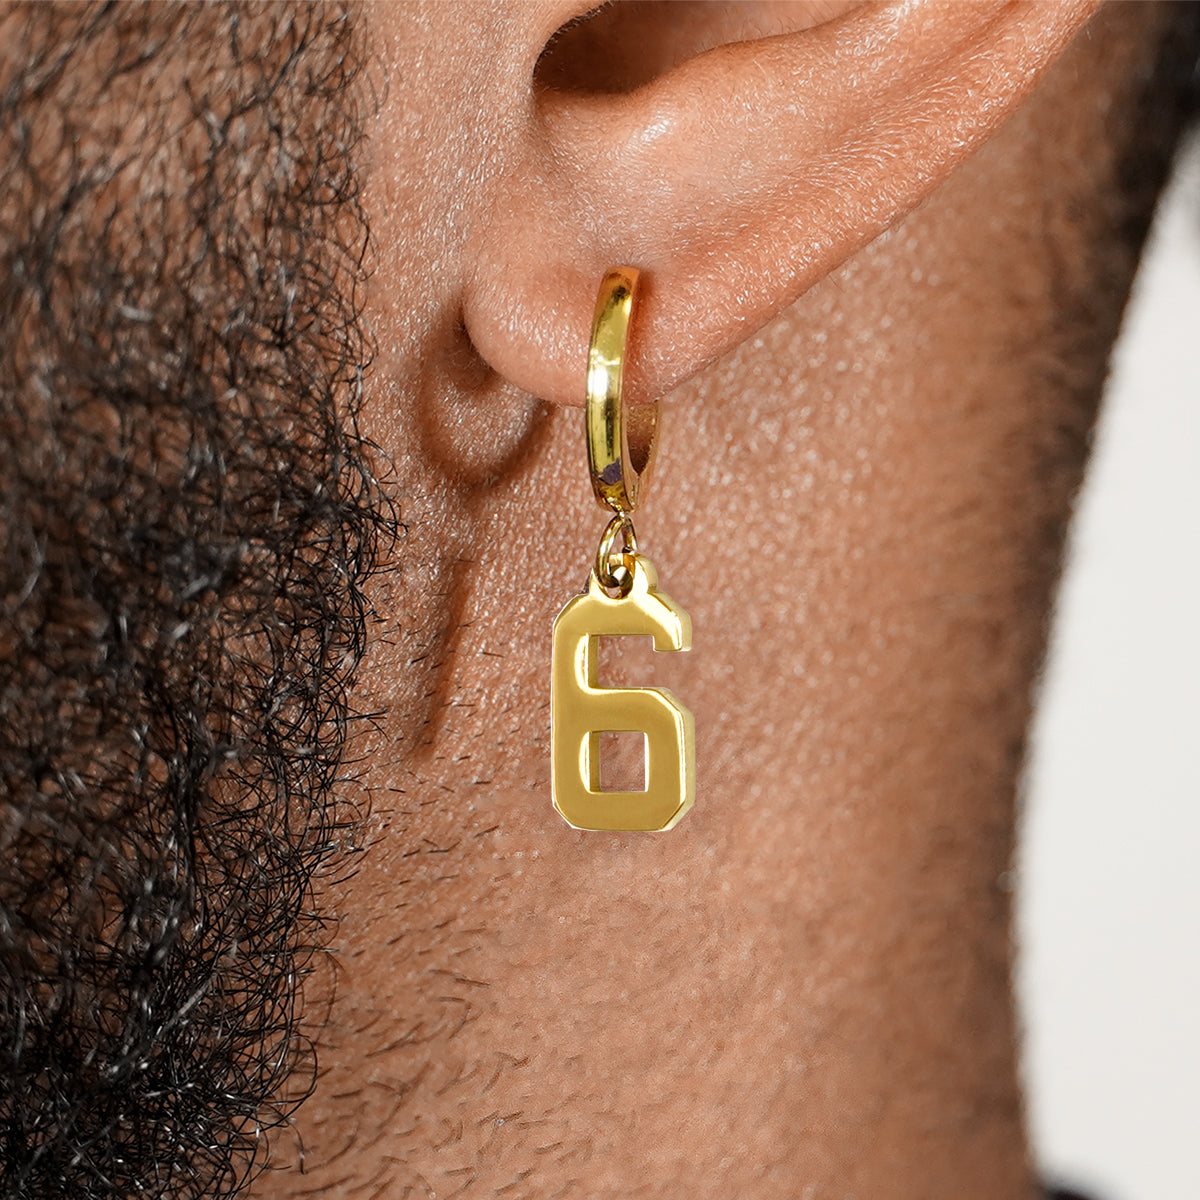 6 Number Earring - Gold Plated Stainless Steel